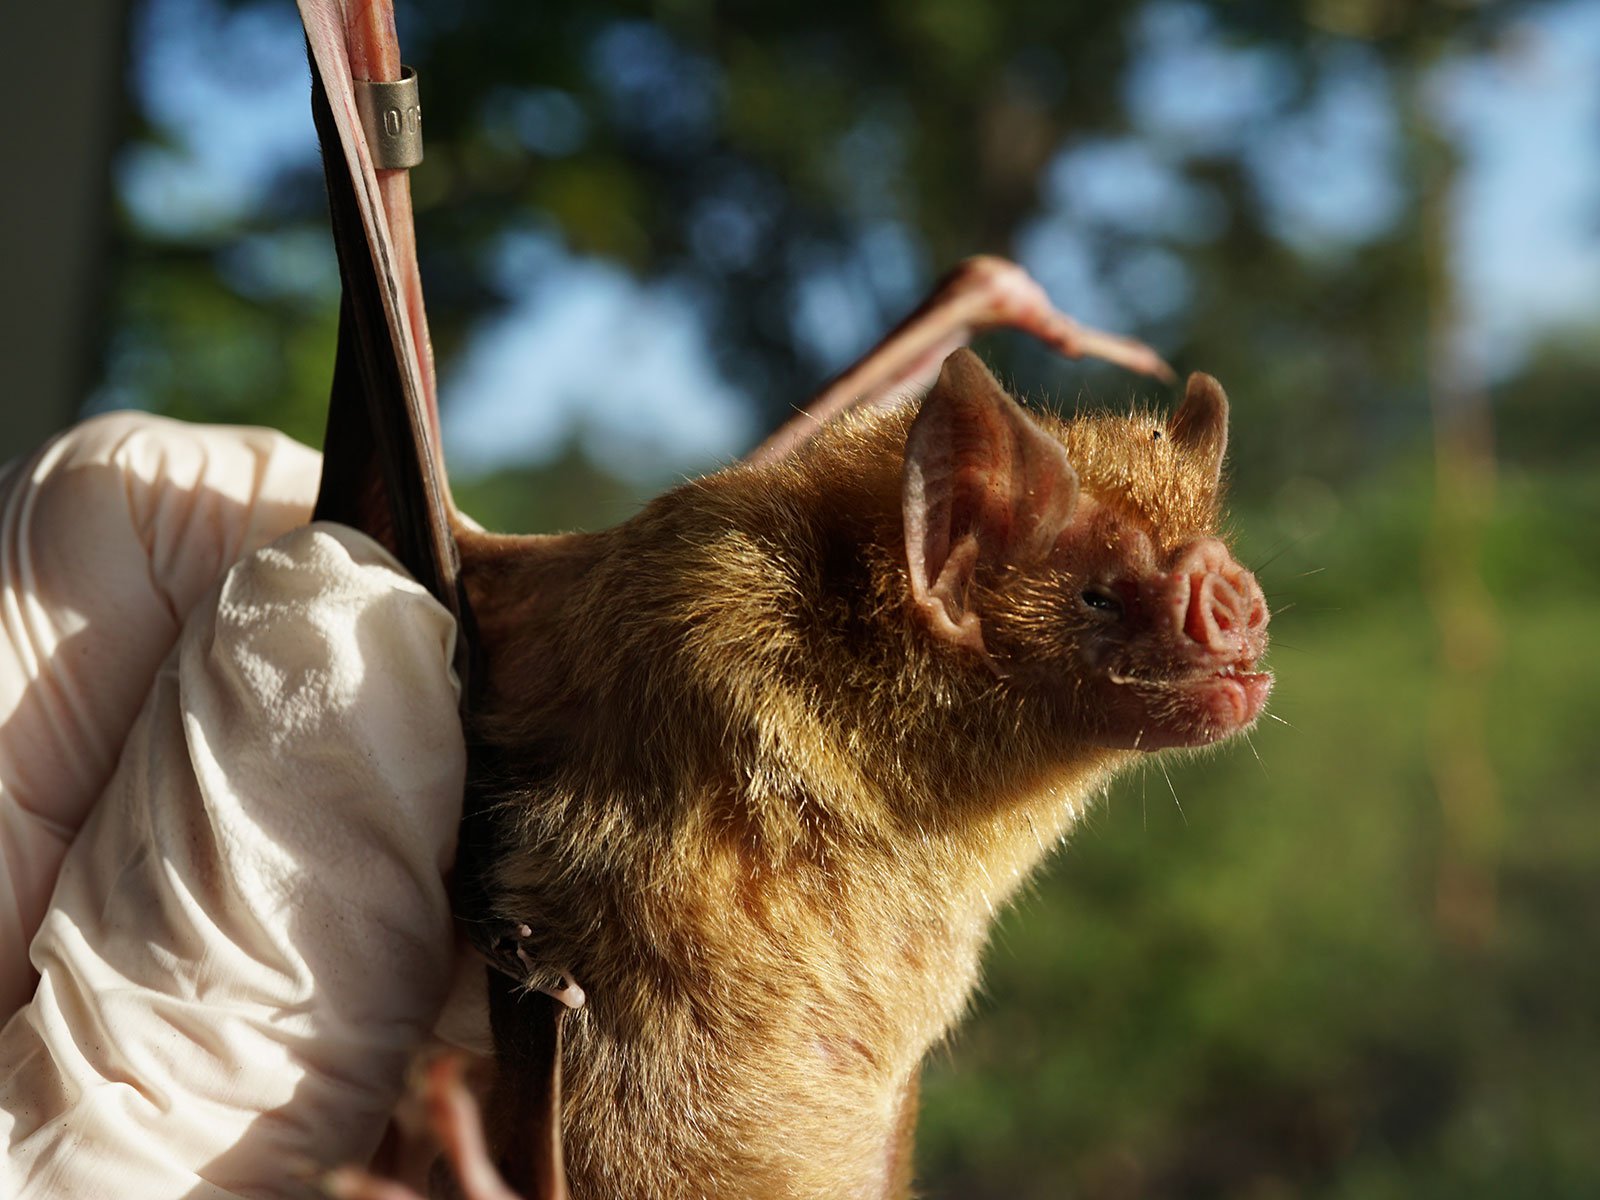 Vampire Bats Call Out to Friends to Share Blood Meals